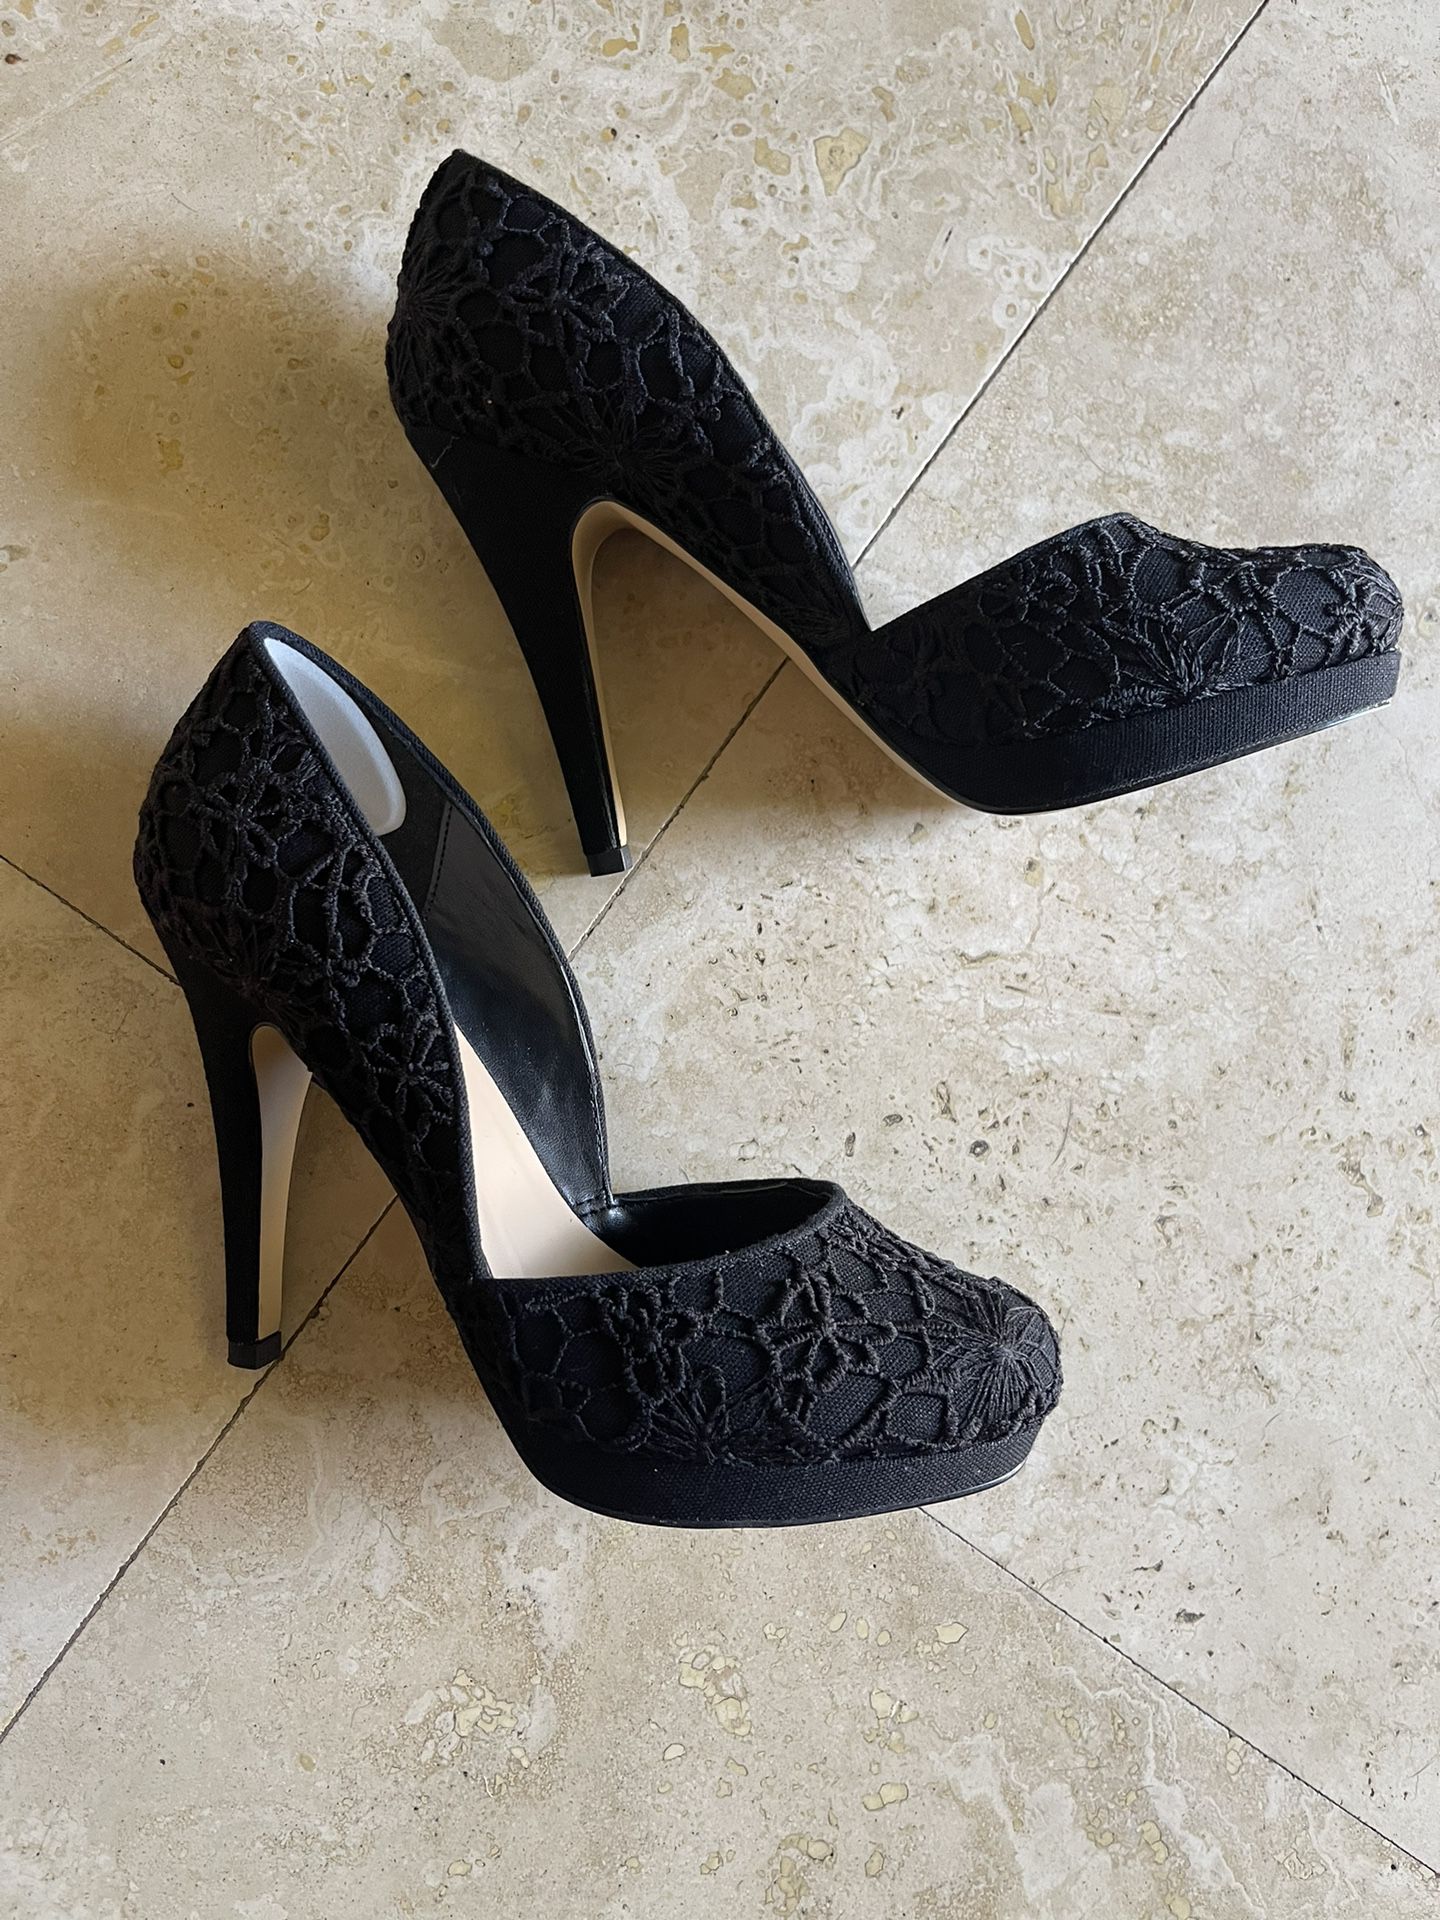 Call It Spring Heels Black Embroidered Brand New 